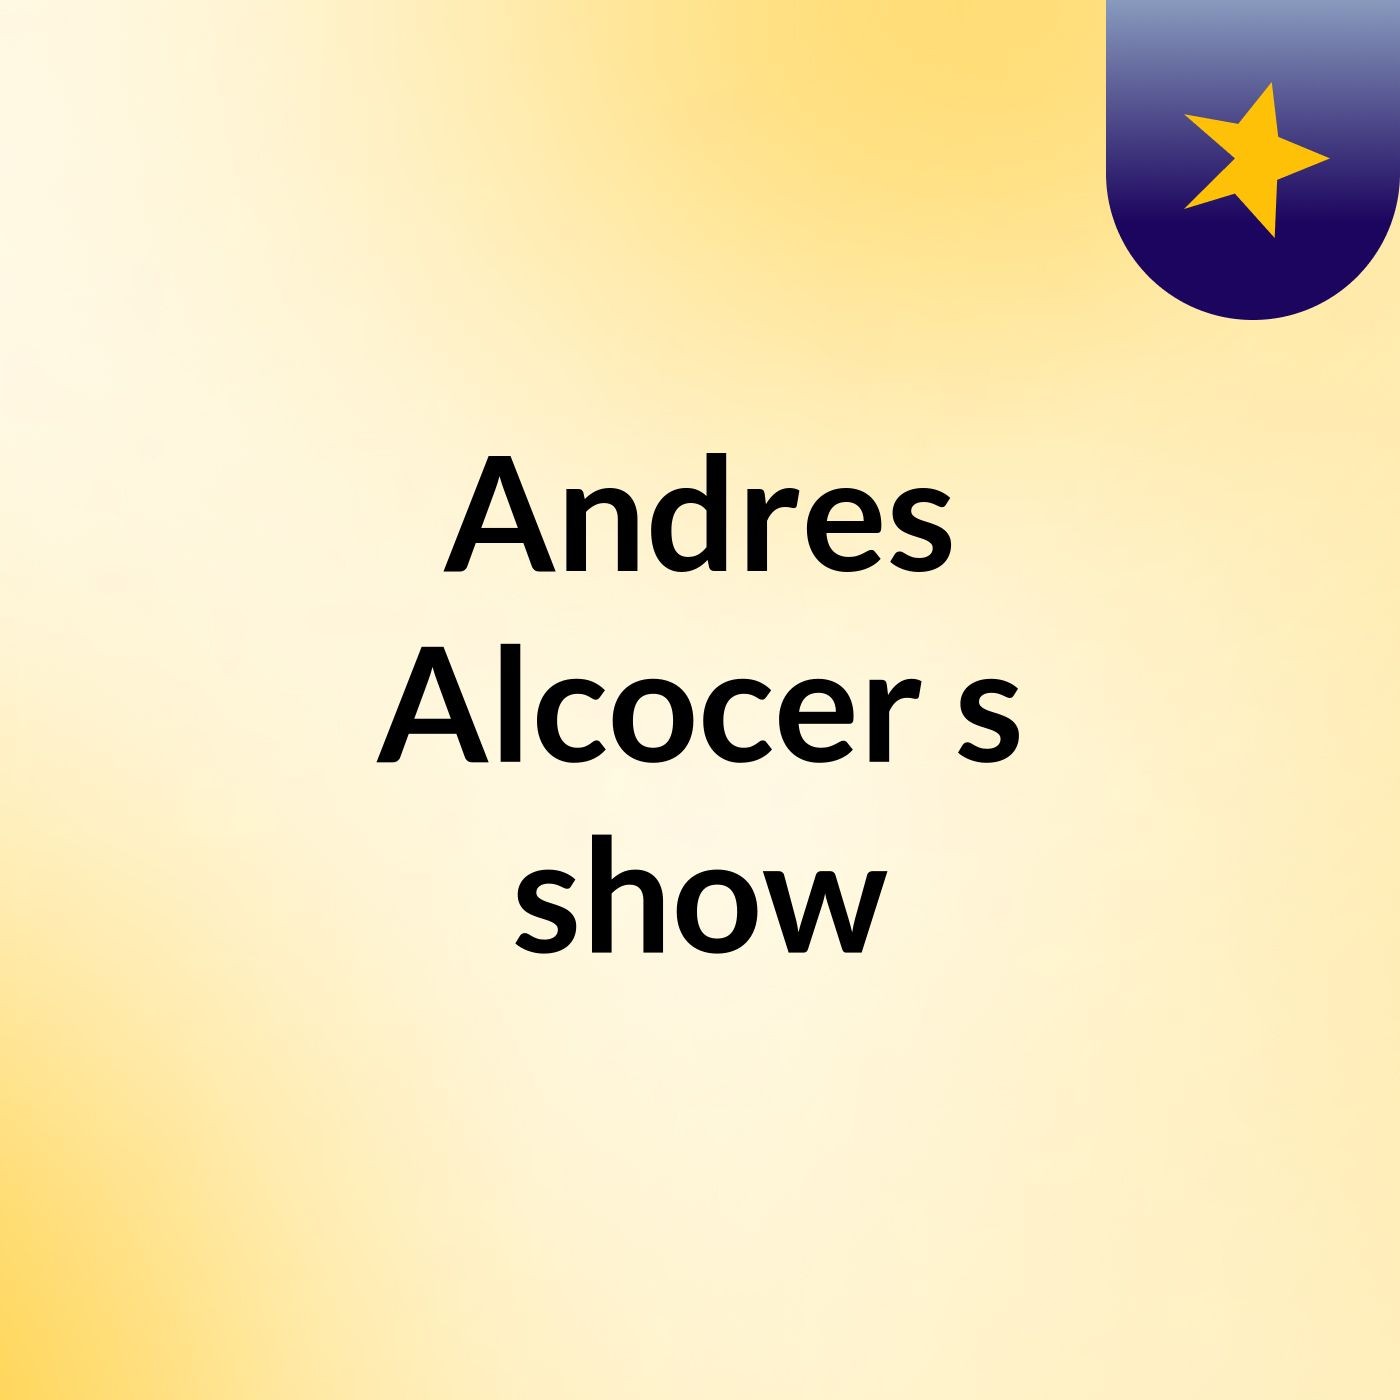 Andres Alcocer's show